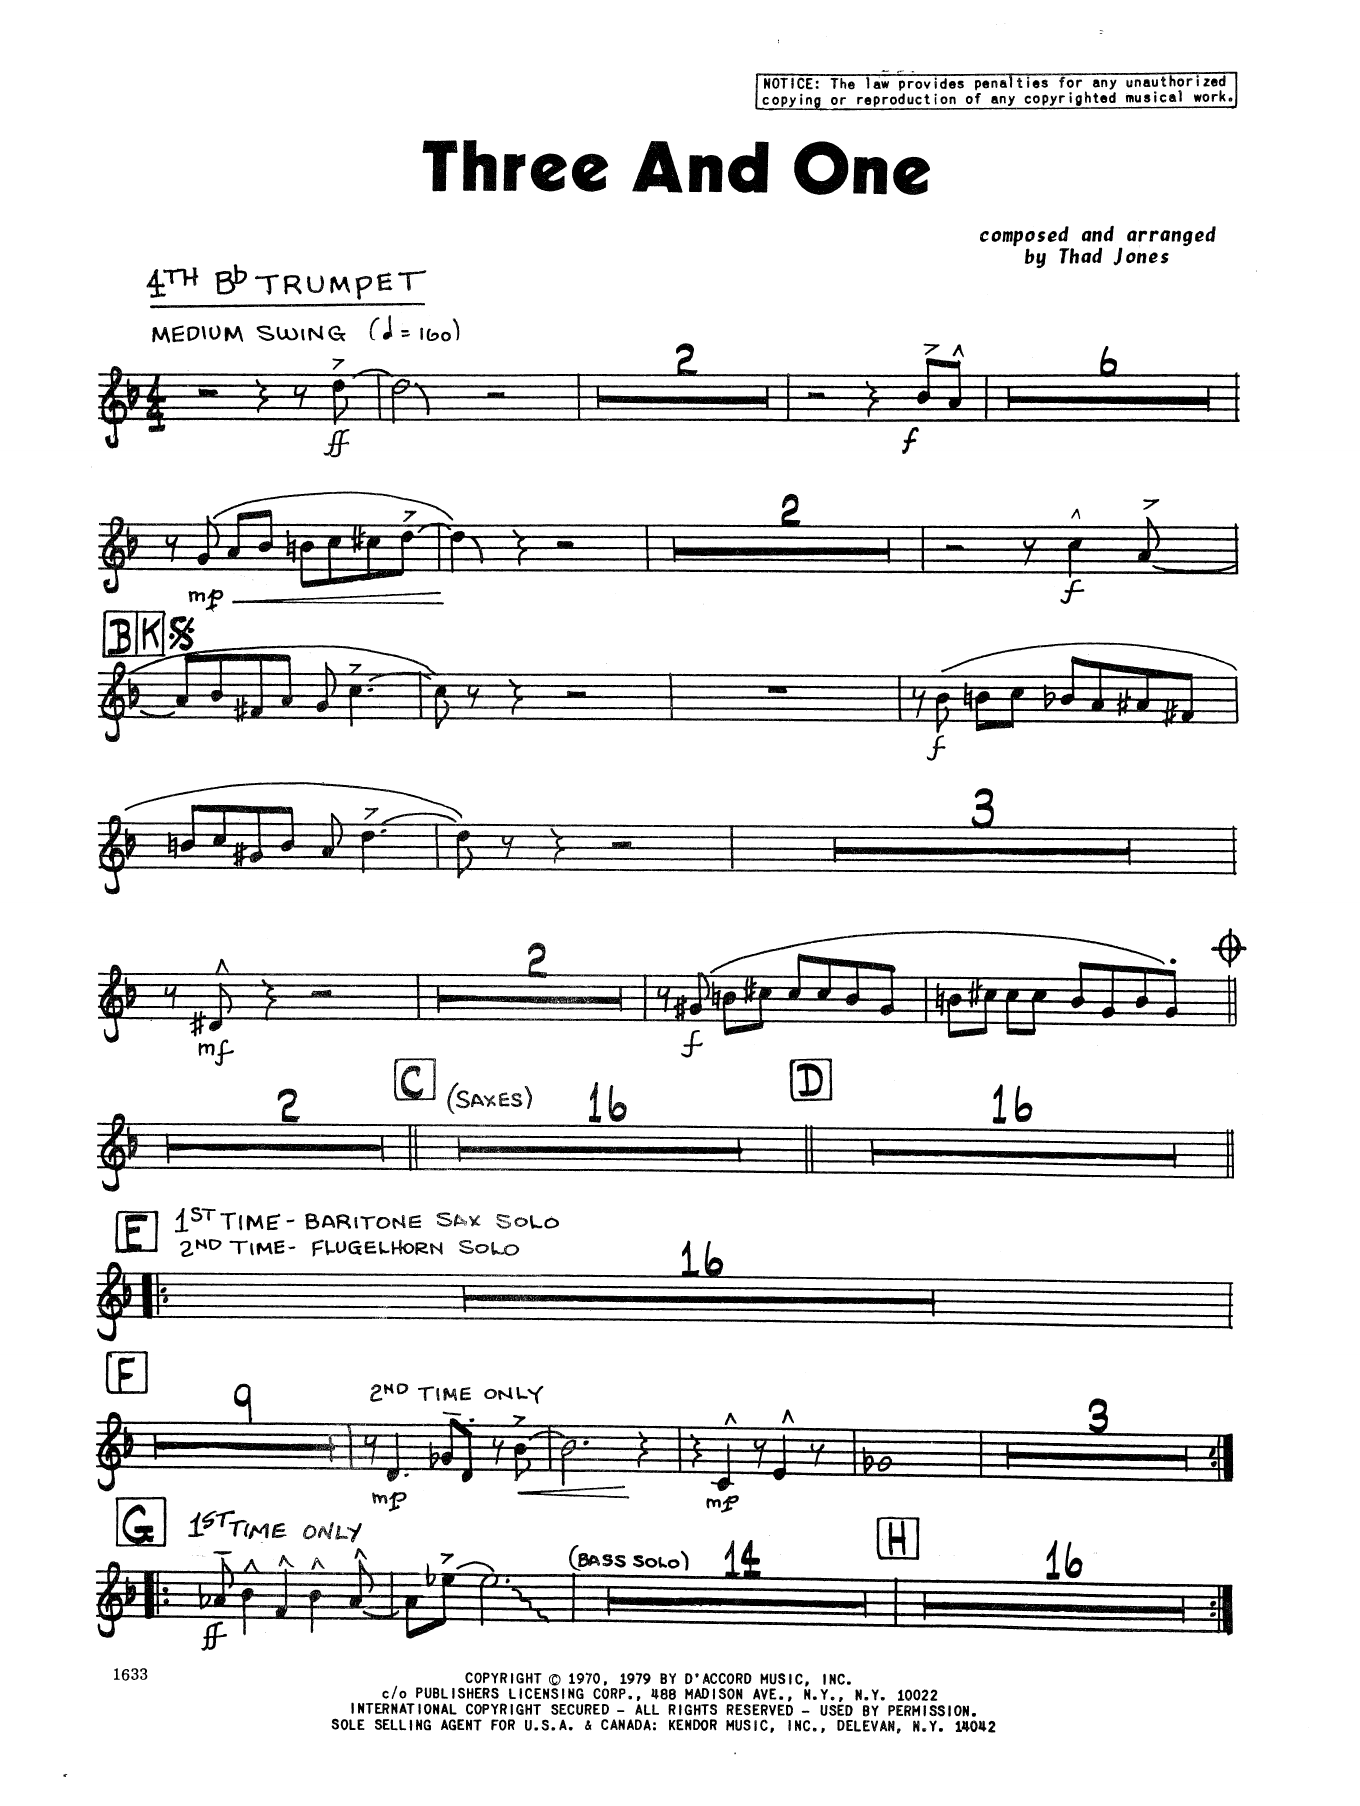 Download Thad Jones Three And One - 4th Bb Trumpet Sheet Music